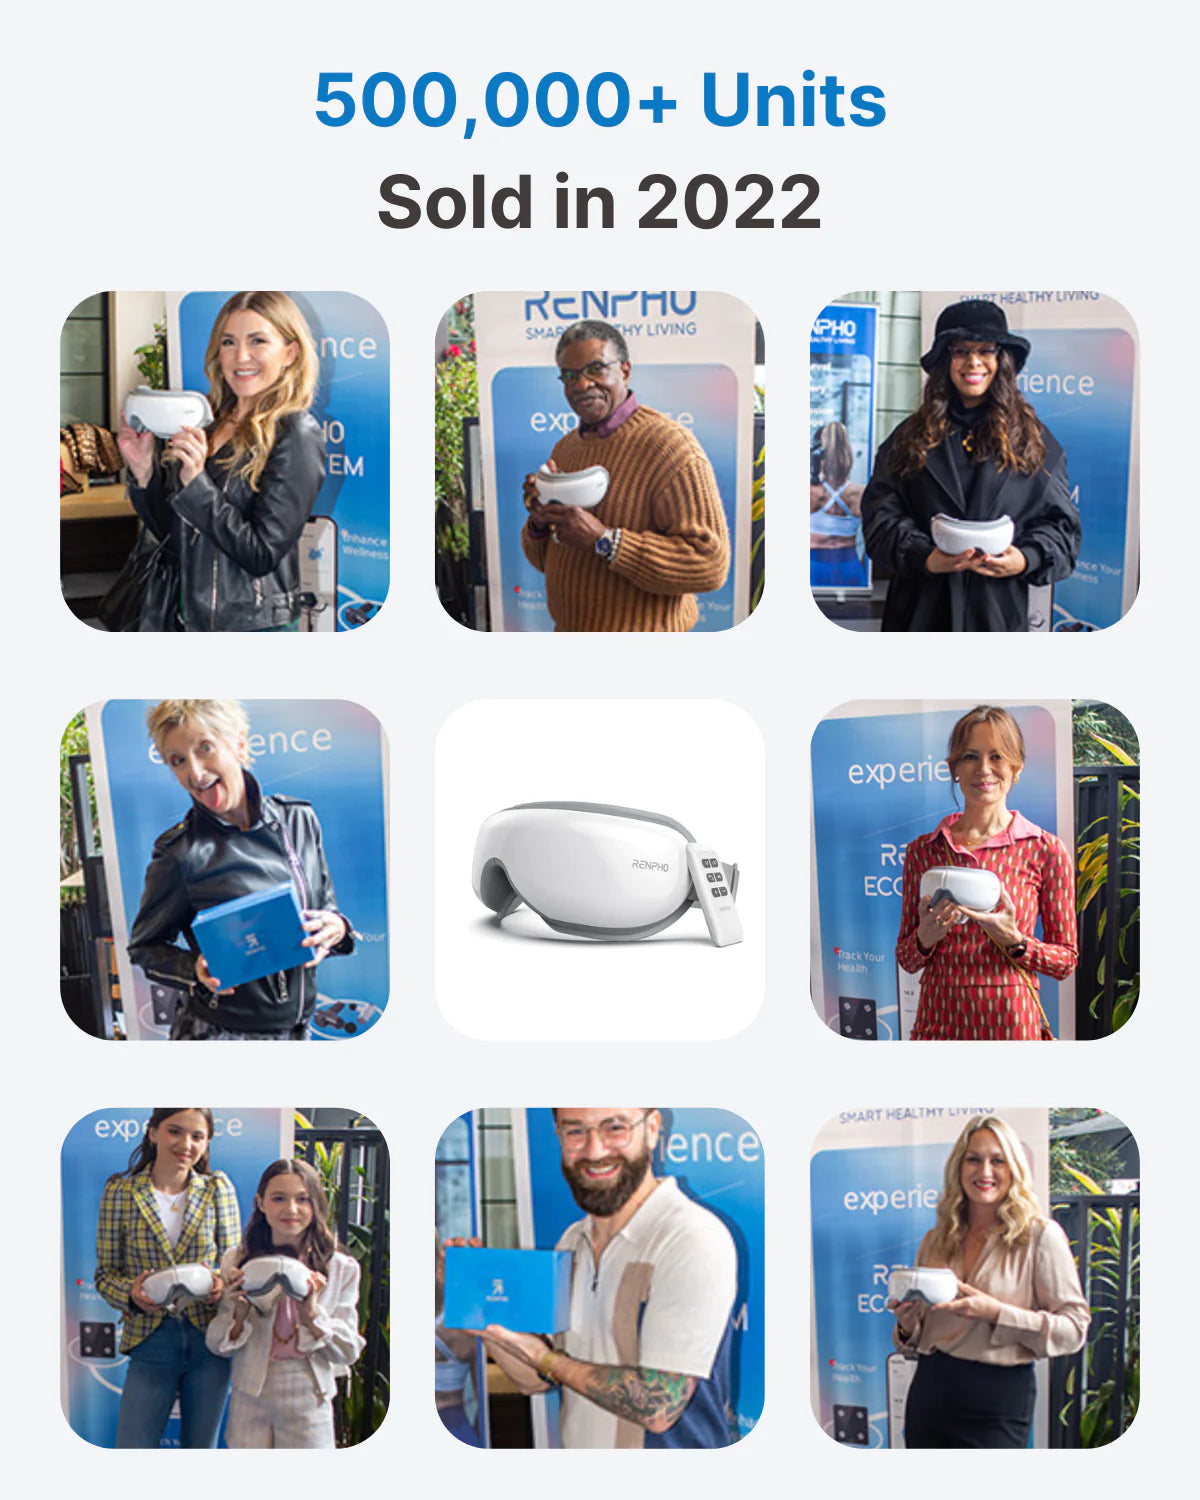 A promotional image with text "500,000+ Units Sold in 2022" highlights various people holding Renpho EU Eyeris 1 Eye Massagers. The collage showcases smiling individuals, both male and female, in different settings, all displaying the eye massager against a branded backdrop designed to emphasize its ability to relieve eye strain.